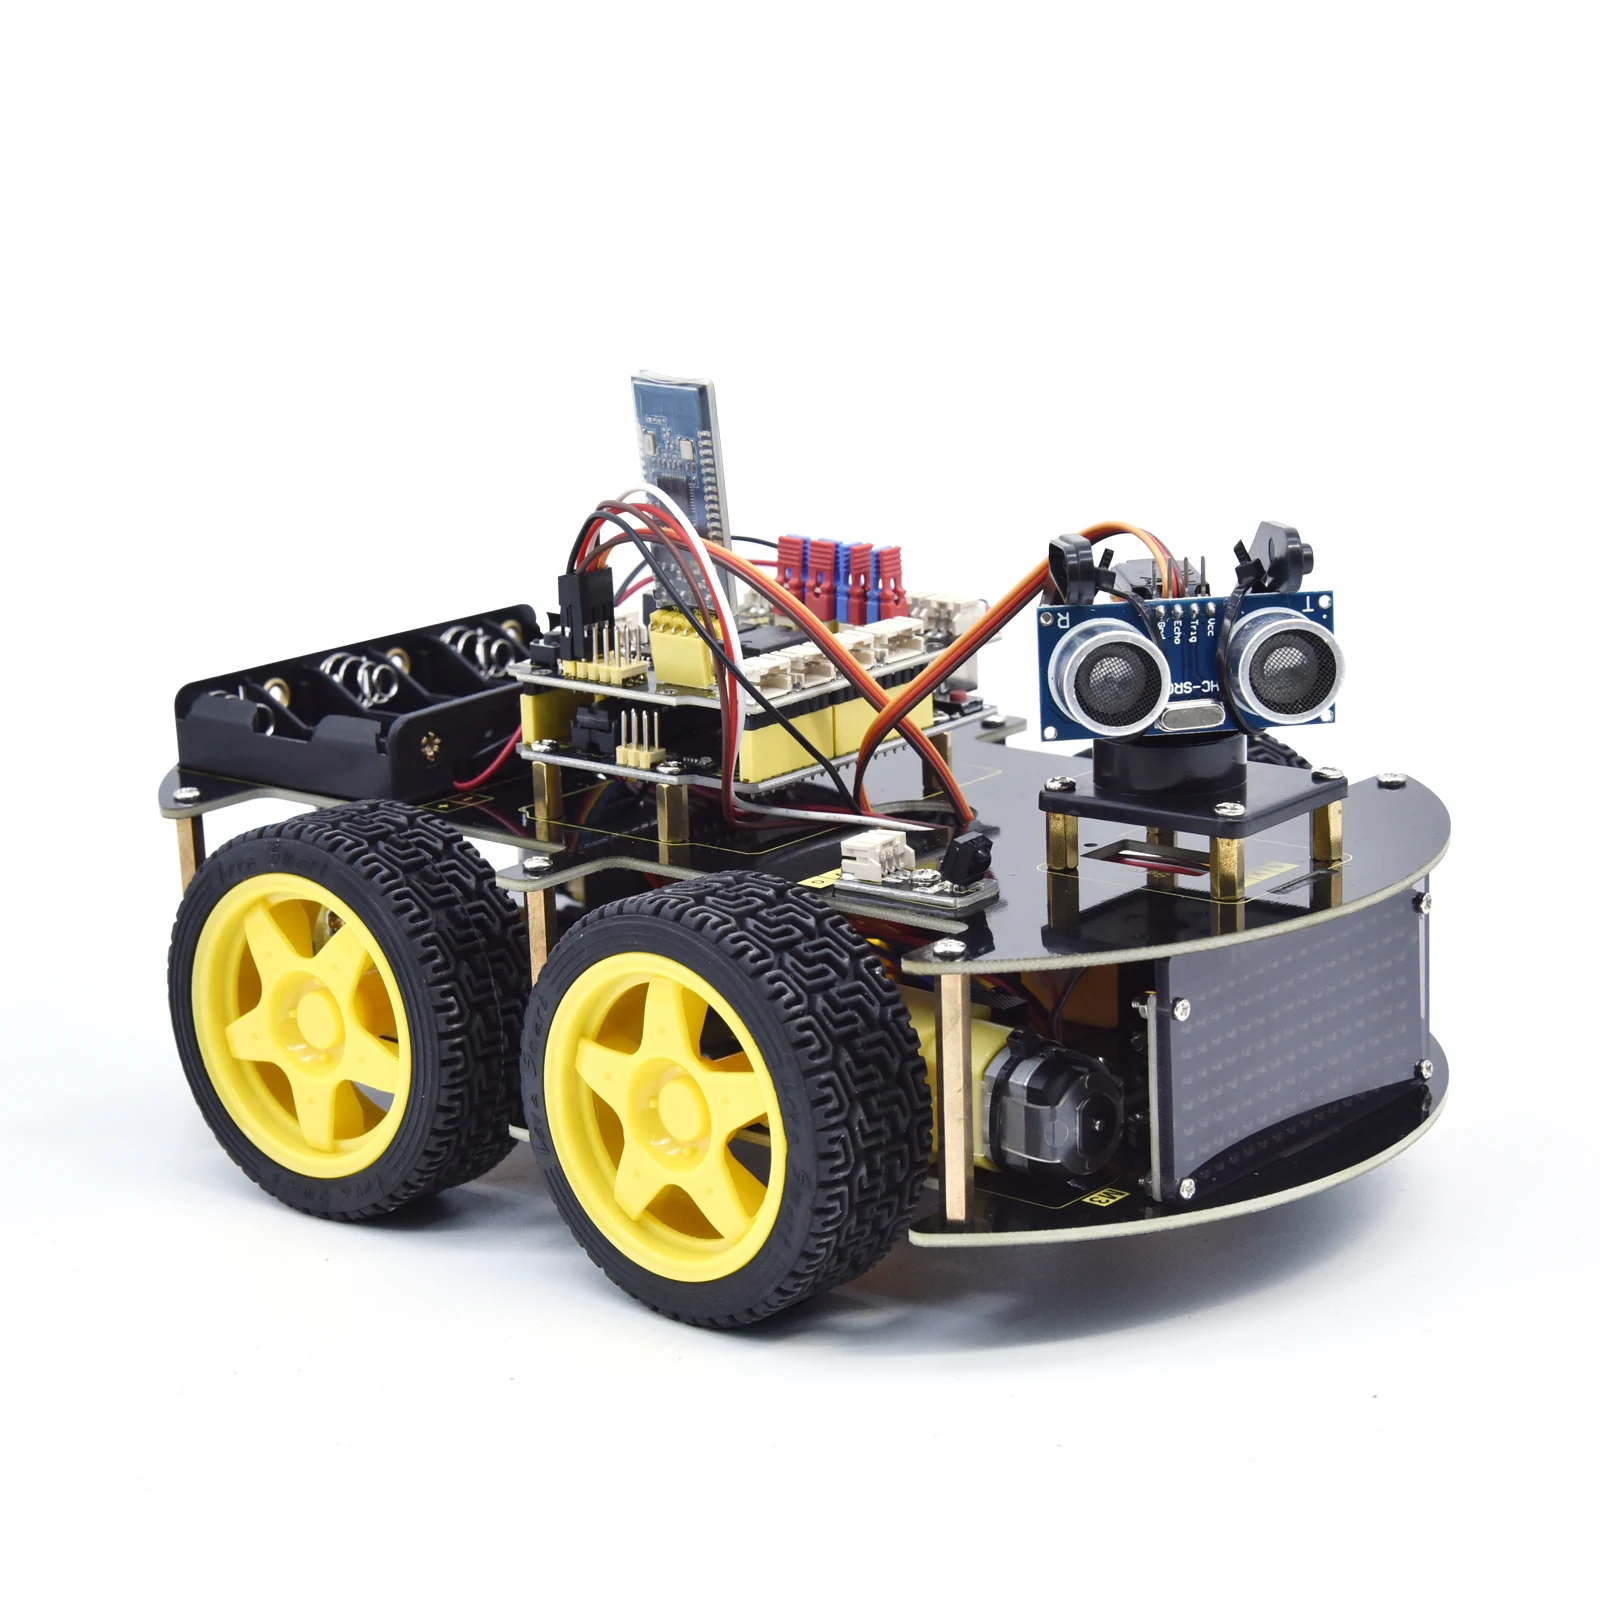 Details about   New  V2.0 Smart Robot car kit for Arduino STEM Robotic Learning Educational Toy 